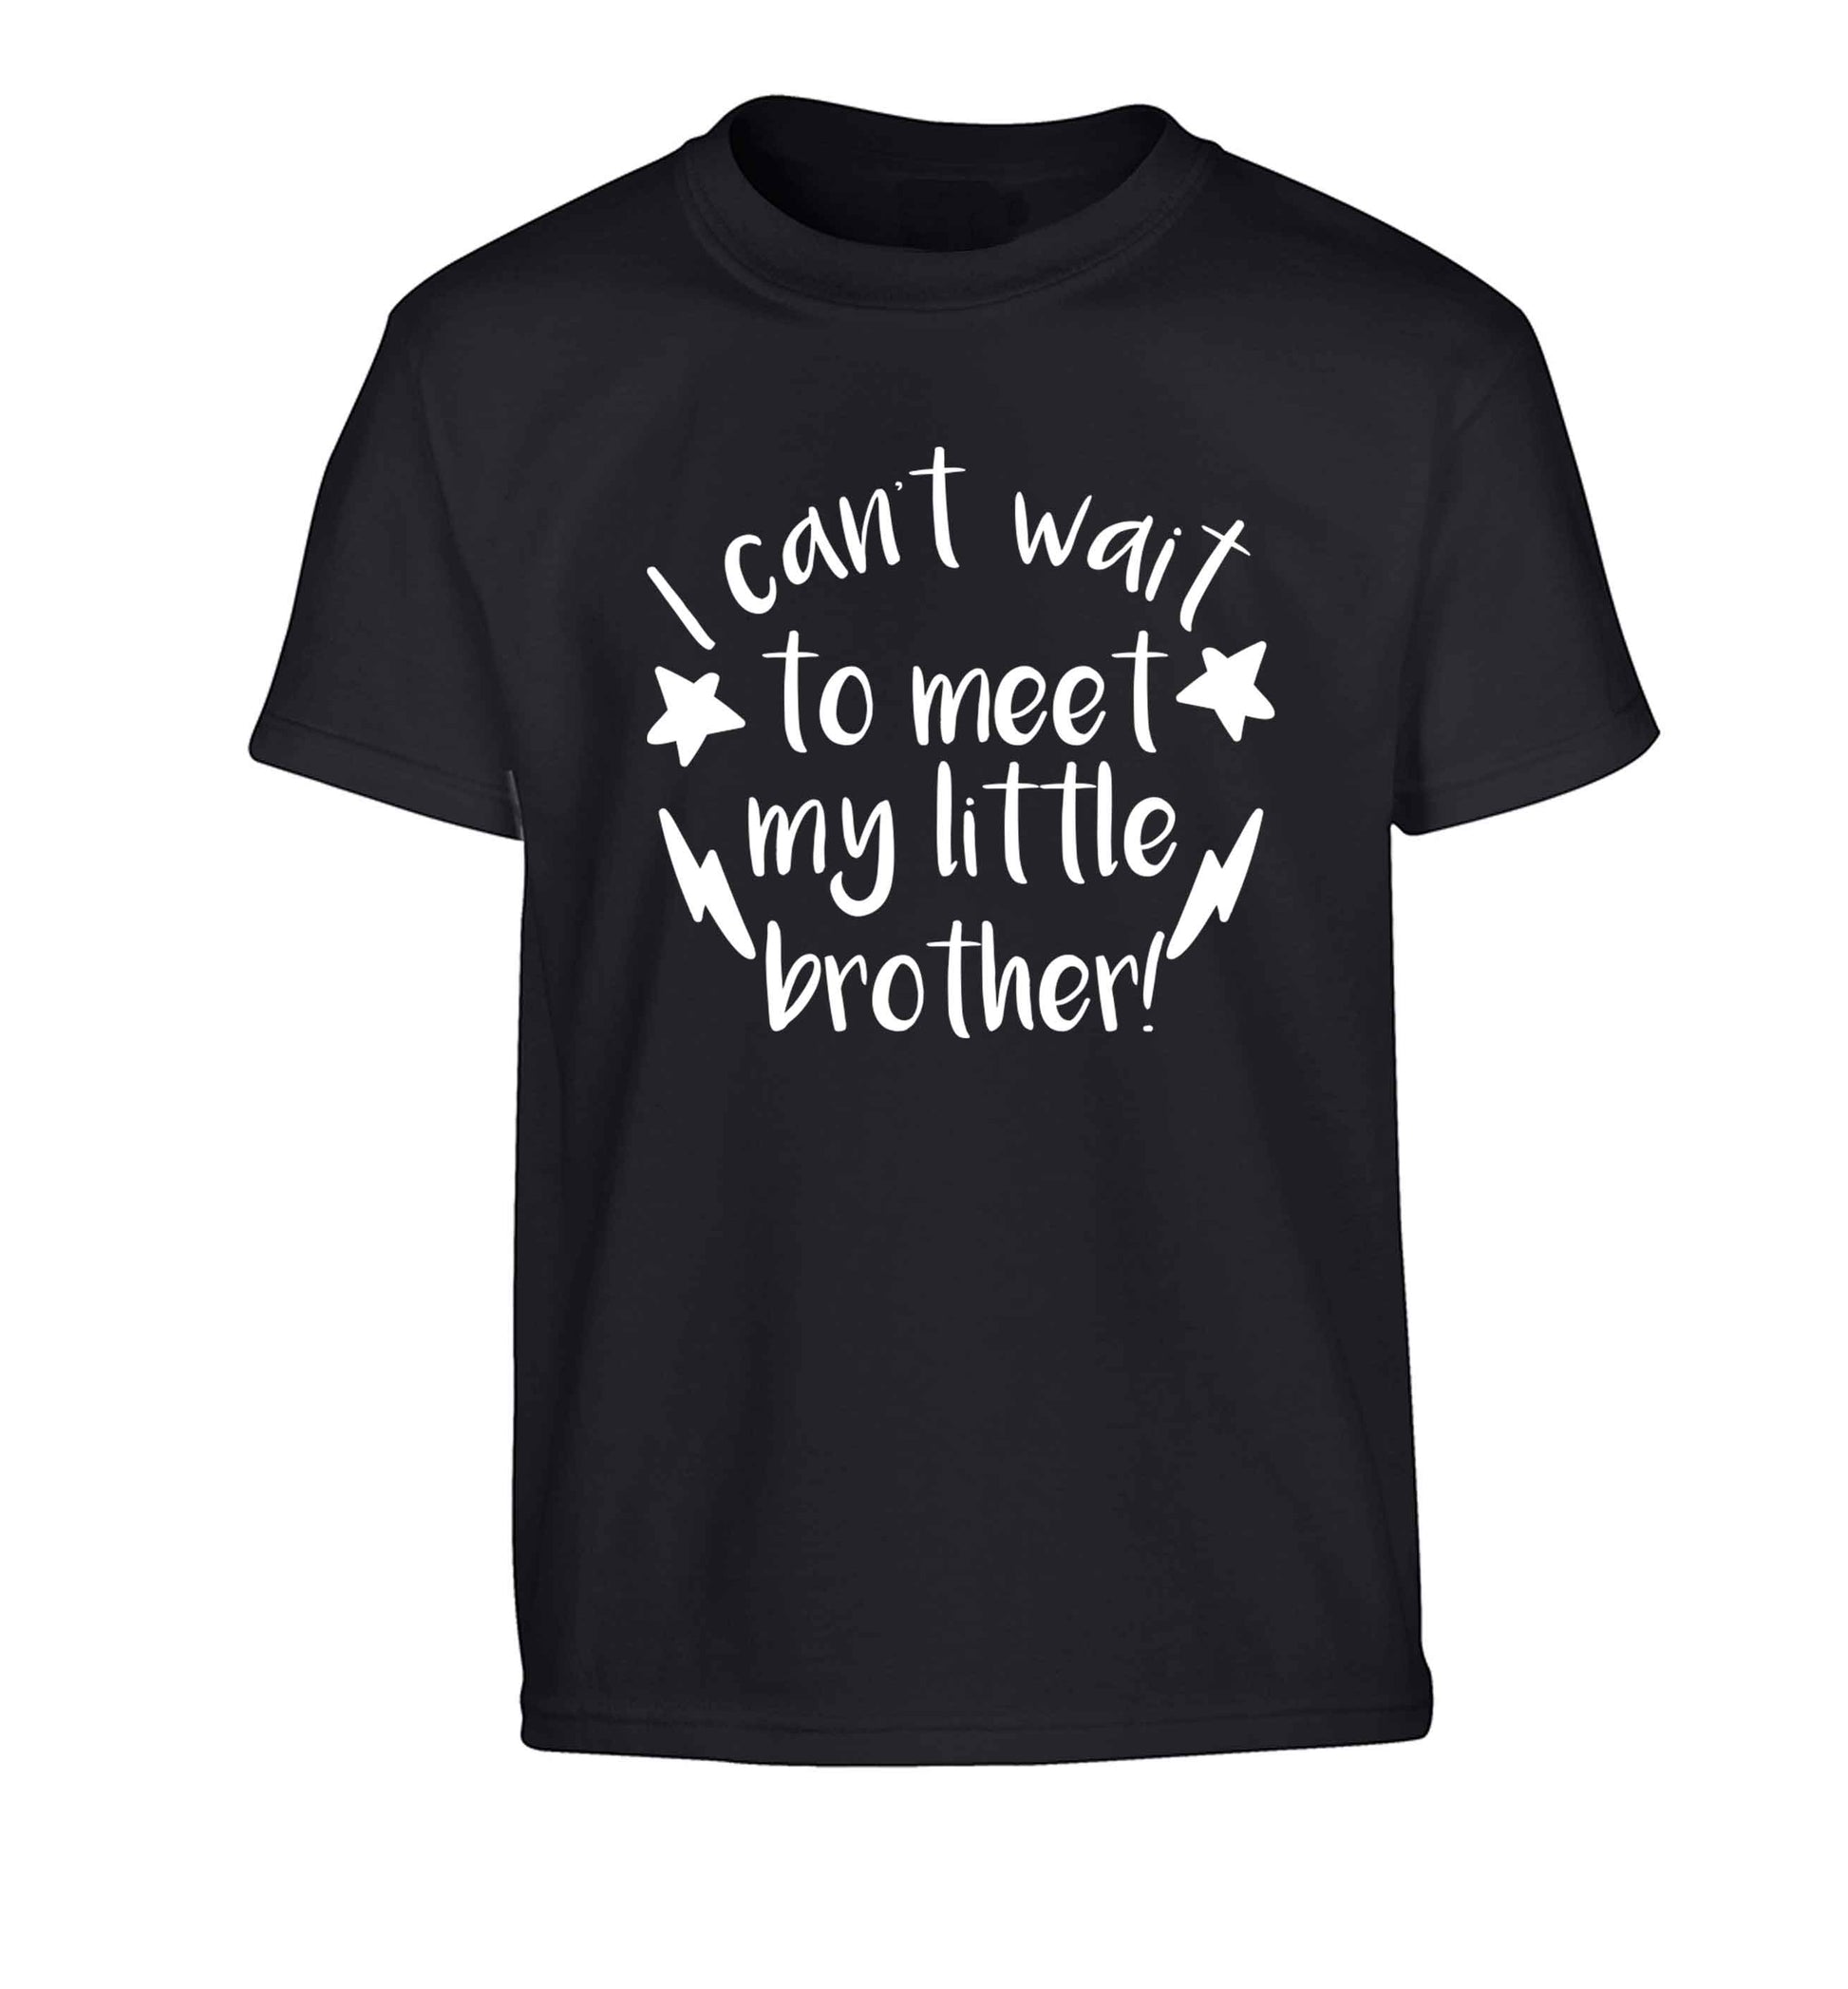 I can't wait to meet my sister! Children's black Tshirt 12-13 Years